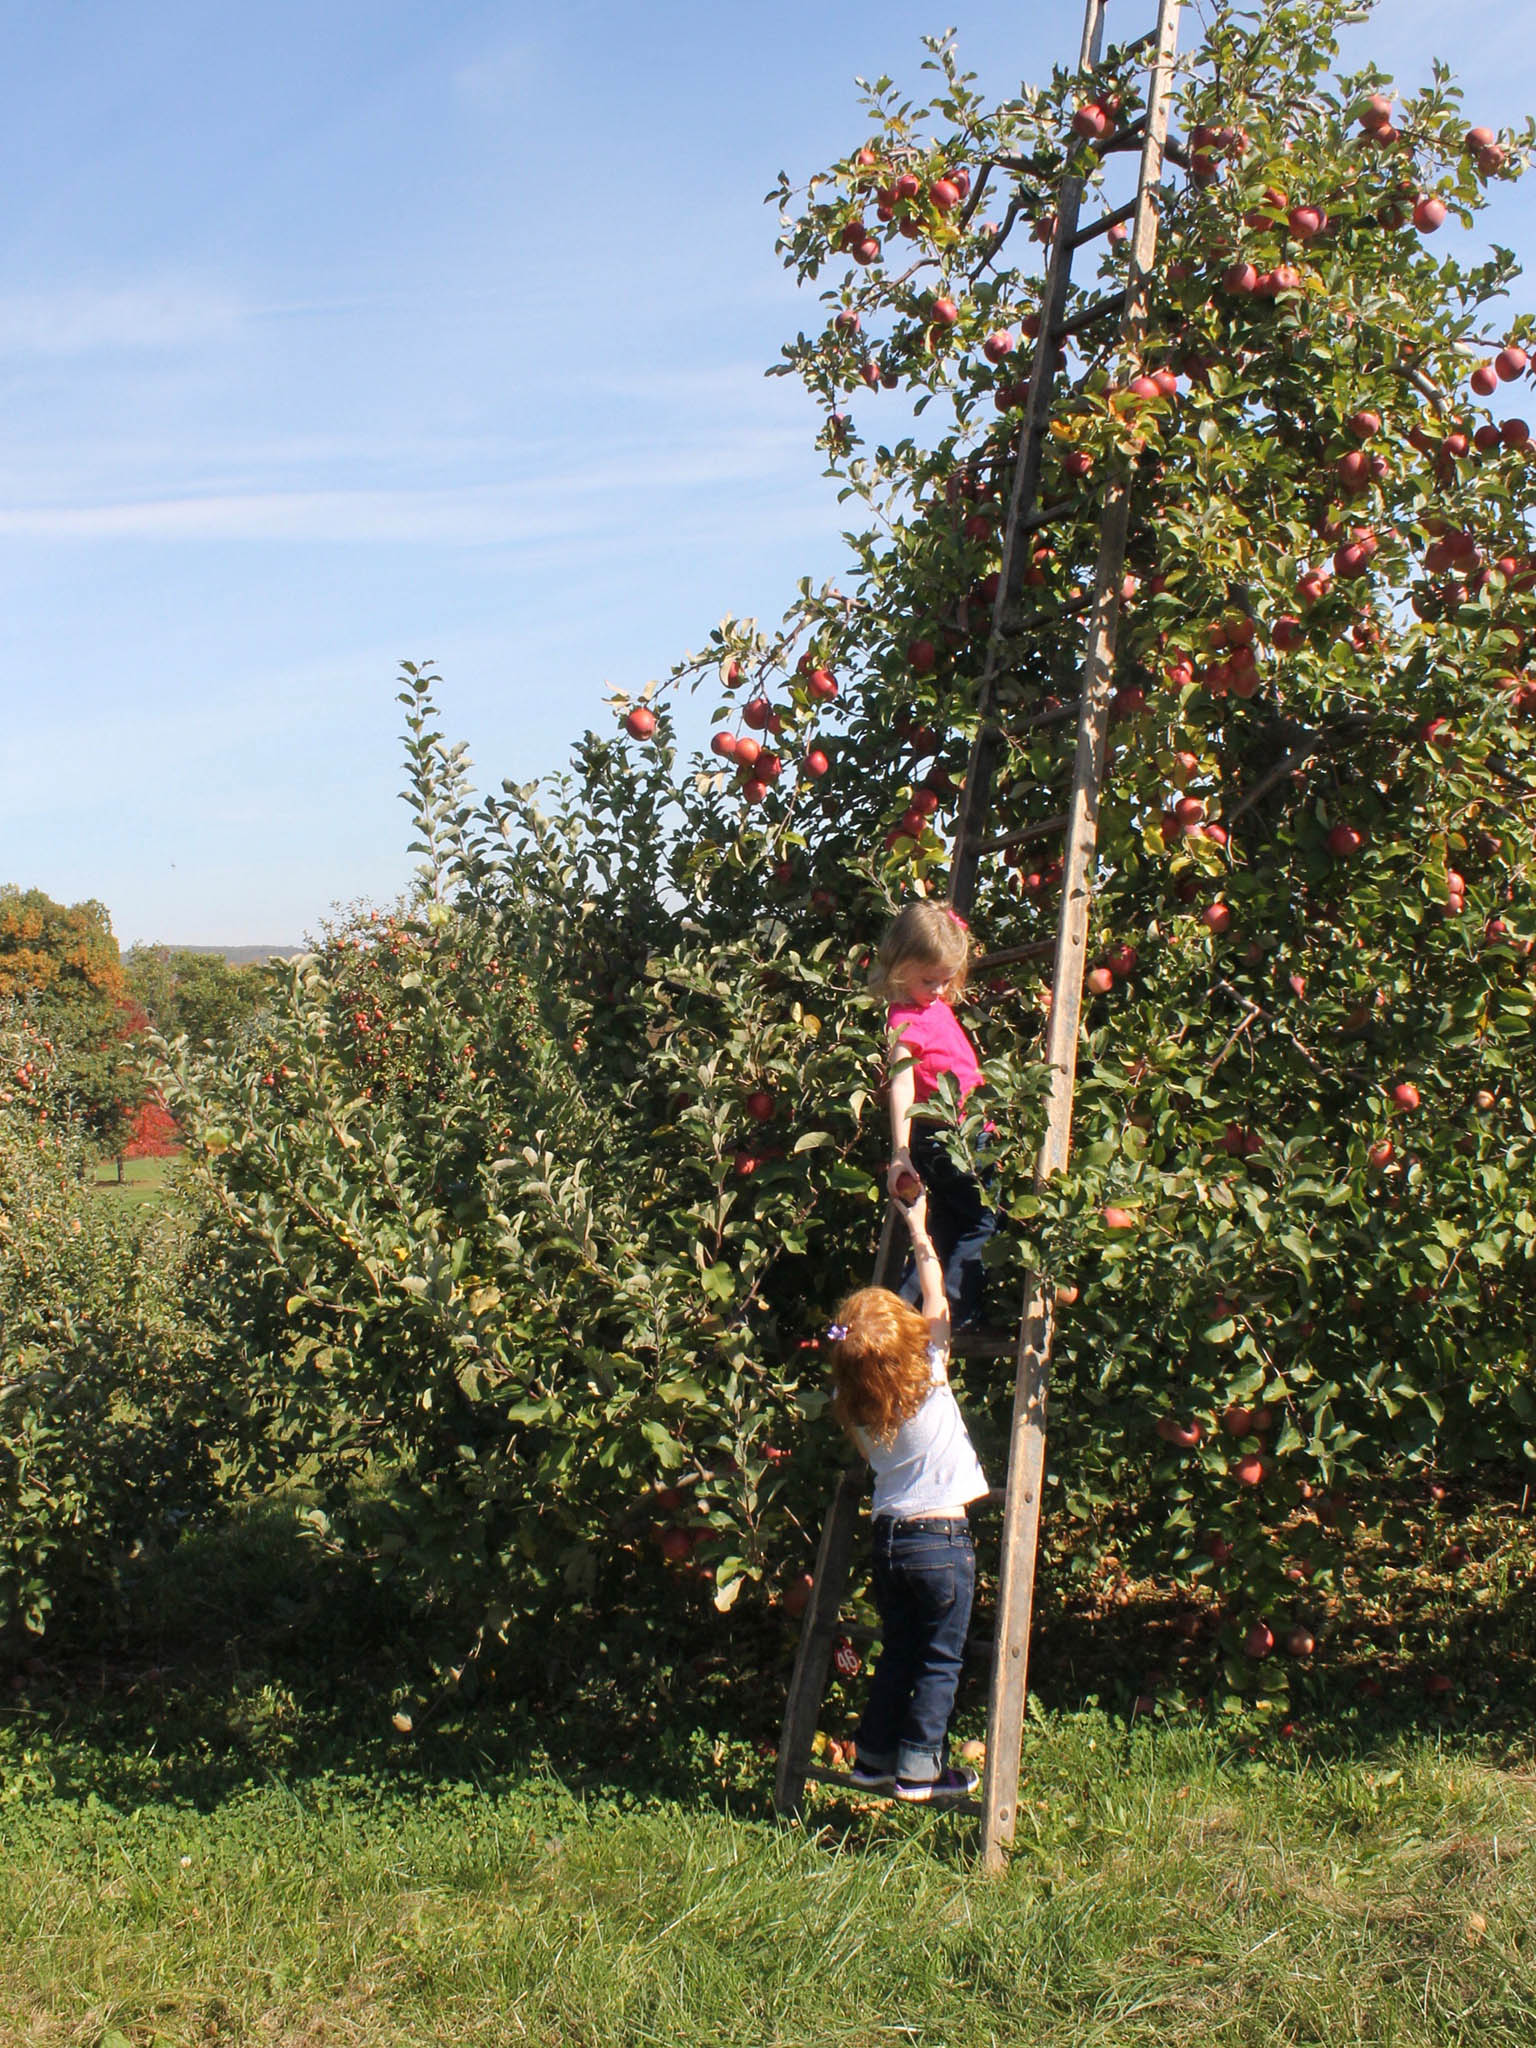 Most of the apple varities in the UK are harvested in October